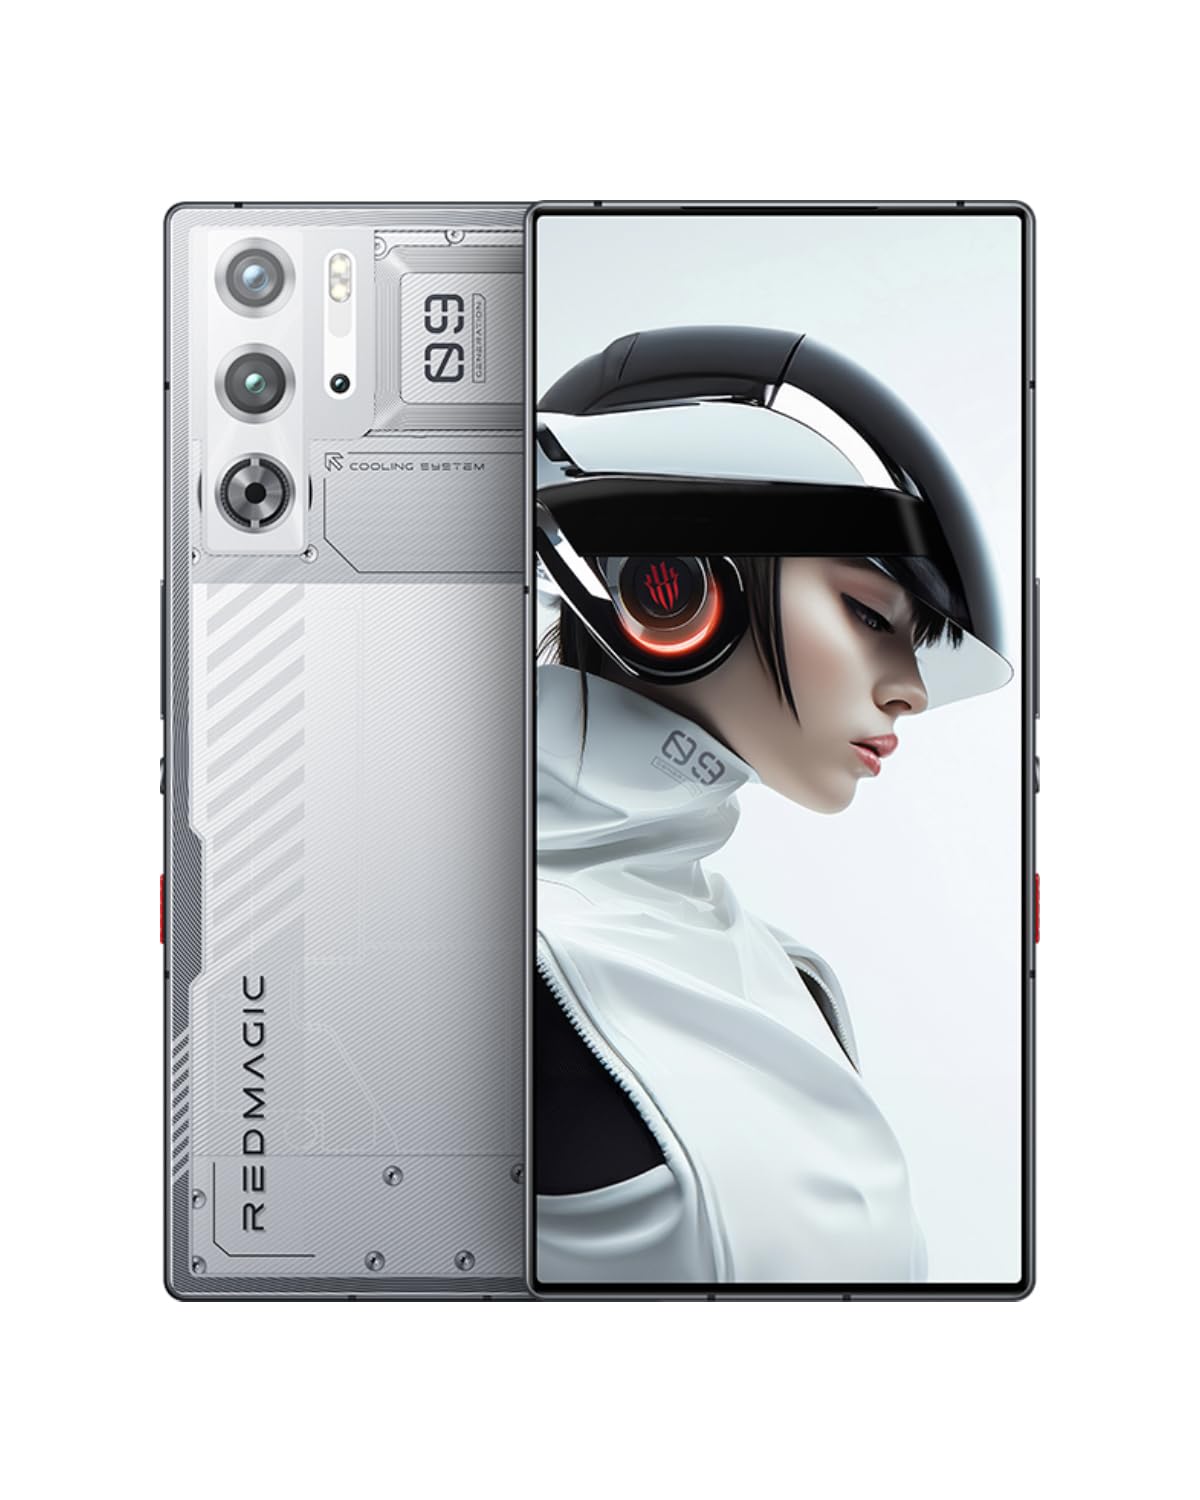 REDMAGIC 9 Pro Smartphone 5G, 120Hz Gaming Phone, 6.8" Full Screen, Under Display Camera, 6500mAh Android Phone, Snapdragon 8 Gen 3, 16+512GB, 80W Charger, Dual-Sim, US Unlocked Cell Phone Silver